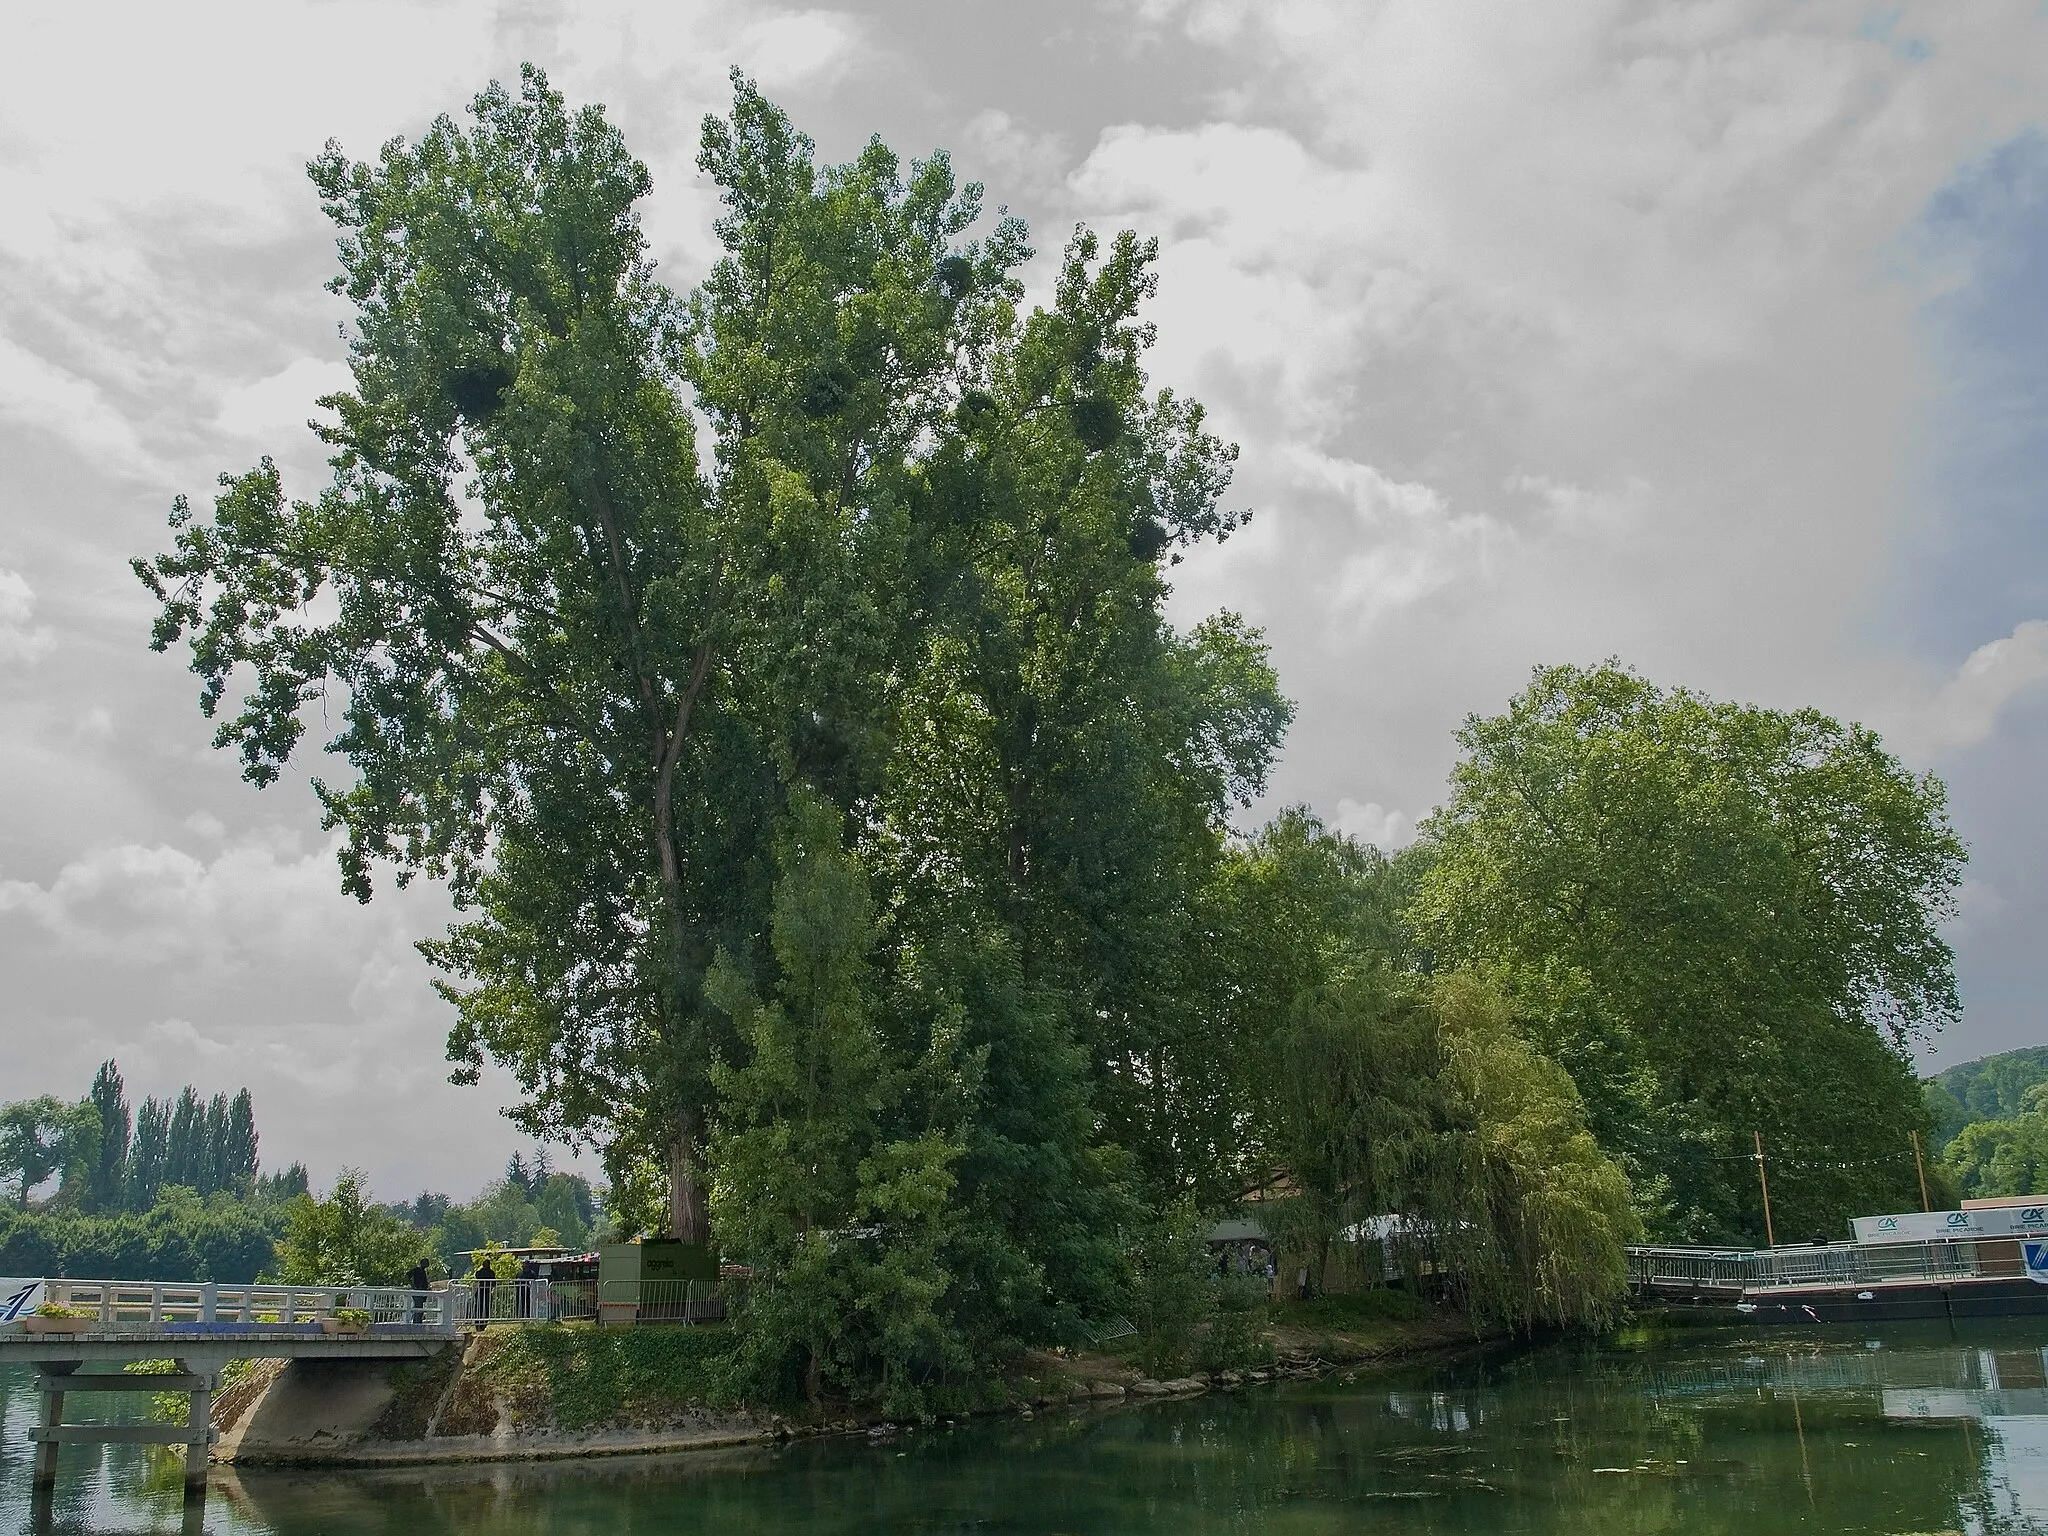 Photo showing: 'Île du Berceau' (="Cradle Island") on the Seine River in Samois-sur Seine, where the Django Reinhardt Festival in Samois-sur-Seine (Seine-et-Marne, France) took place each year from its beginning in 1983 to 2015 (since in chateau de Fontainebleai.